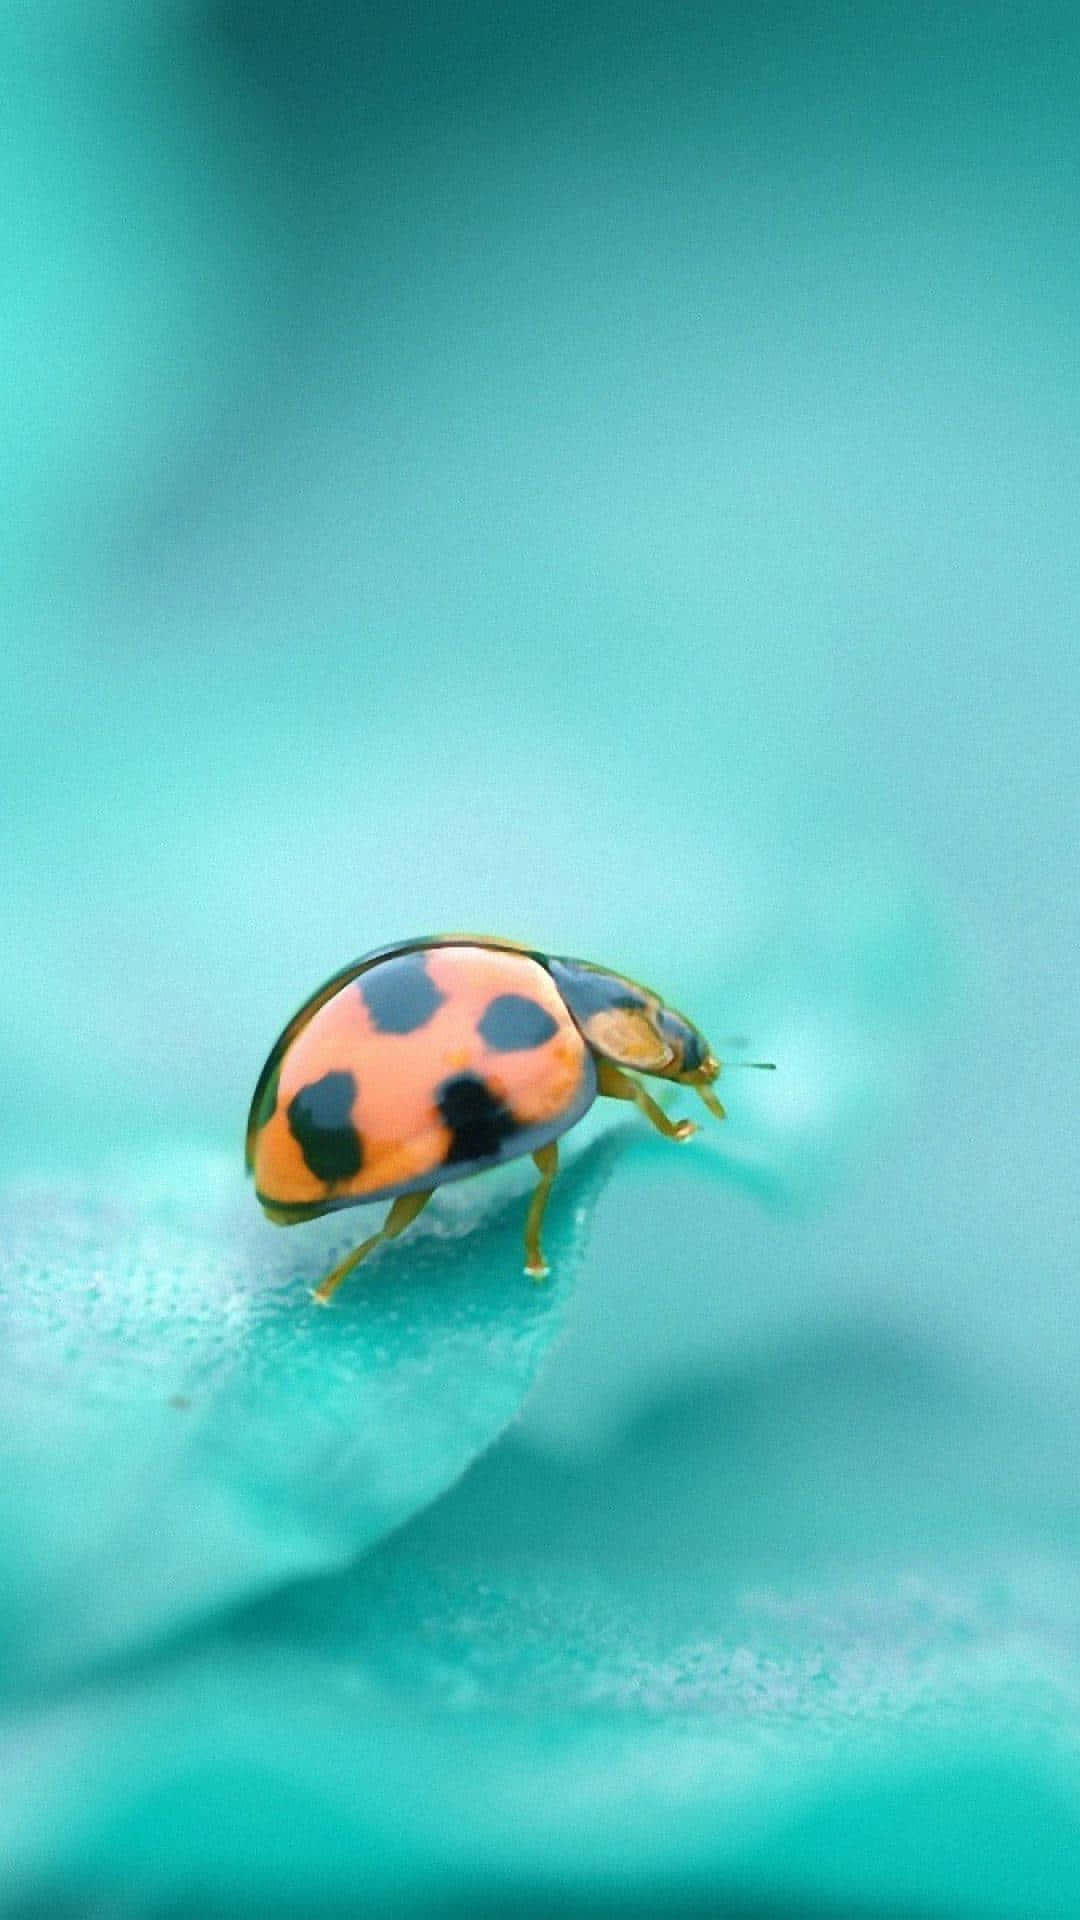 Be Unique and Stylish With A Ladybug Printed Iphone Wallpaper